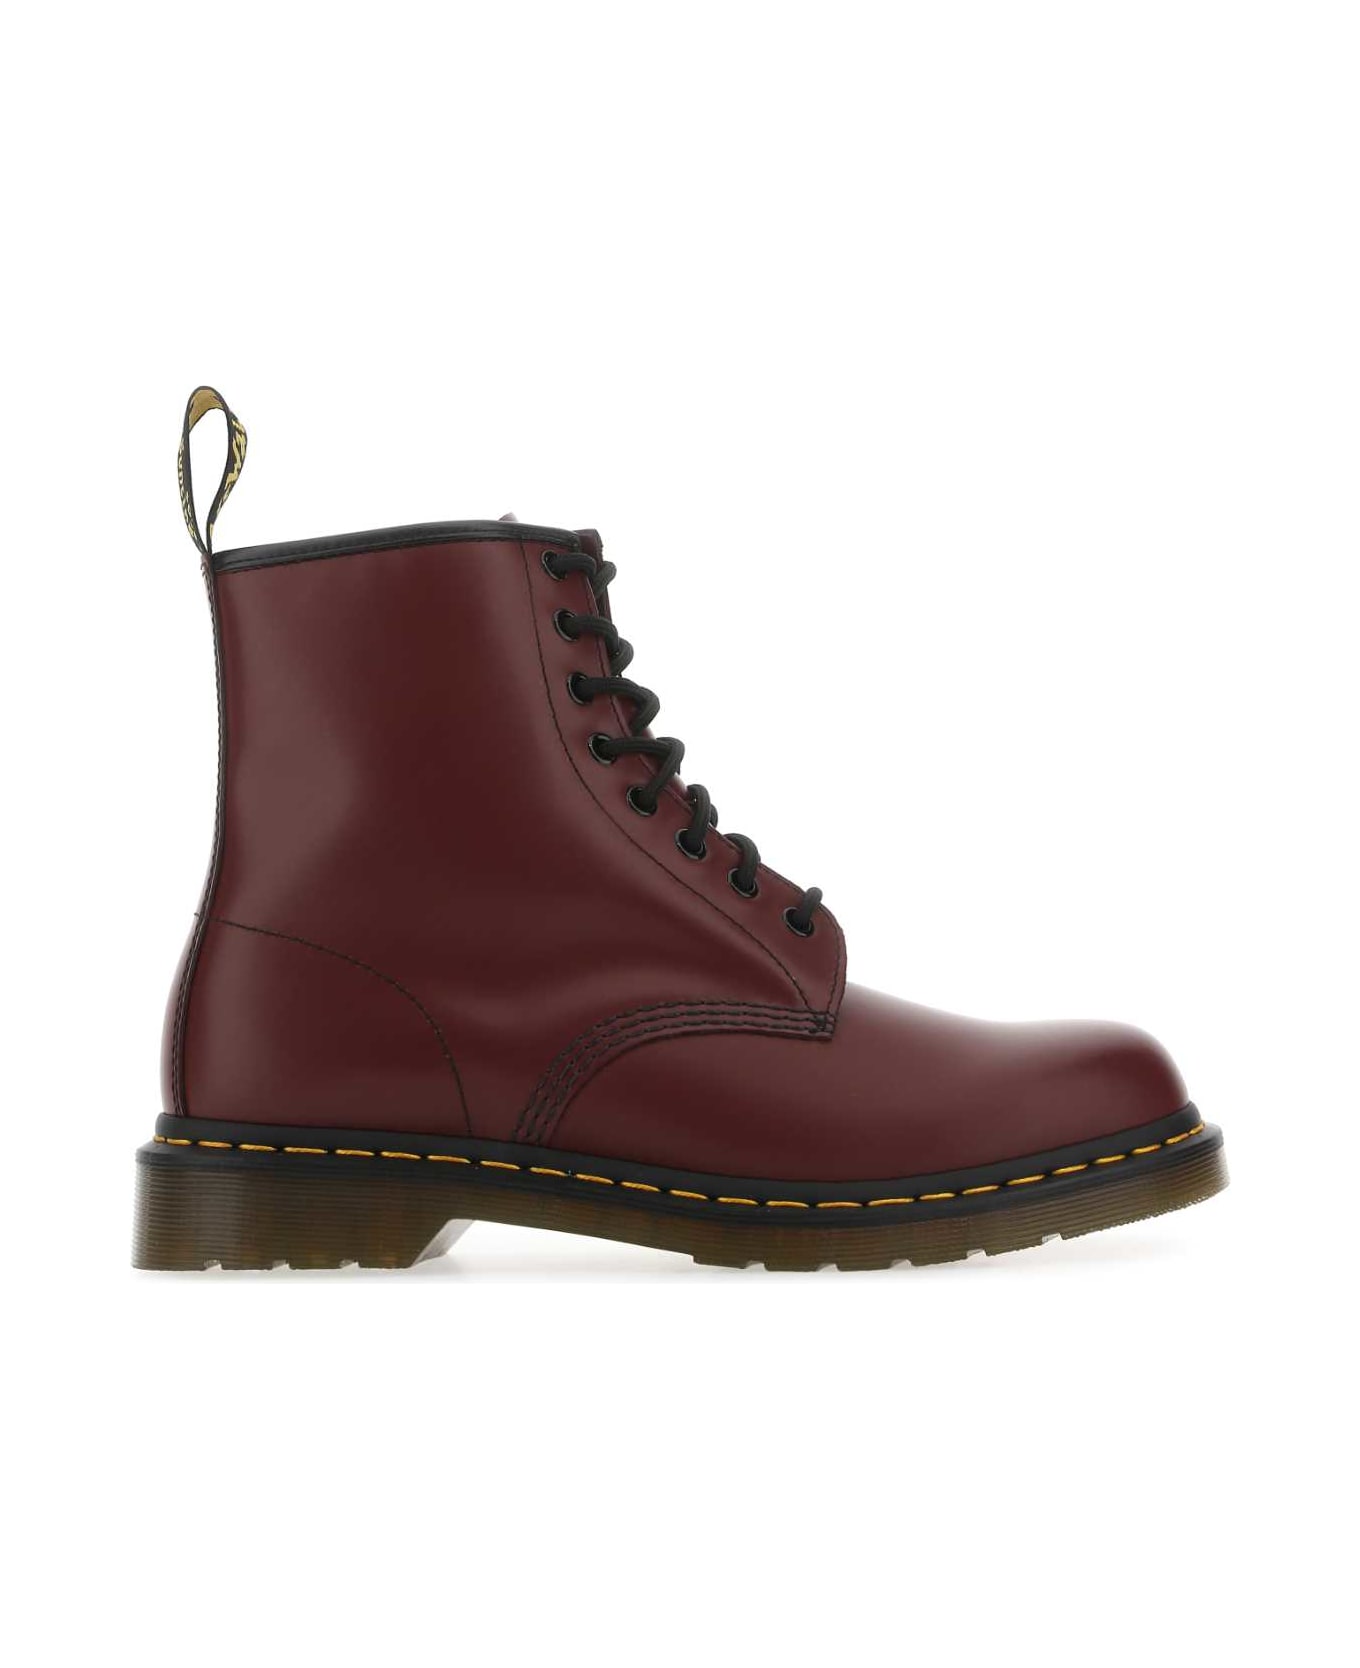 Dr. Martens Burgundy Leather 1460 Ankle Boots - CherryRedSmooth name:458